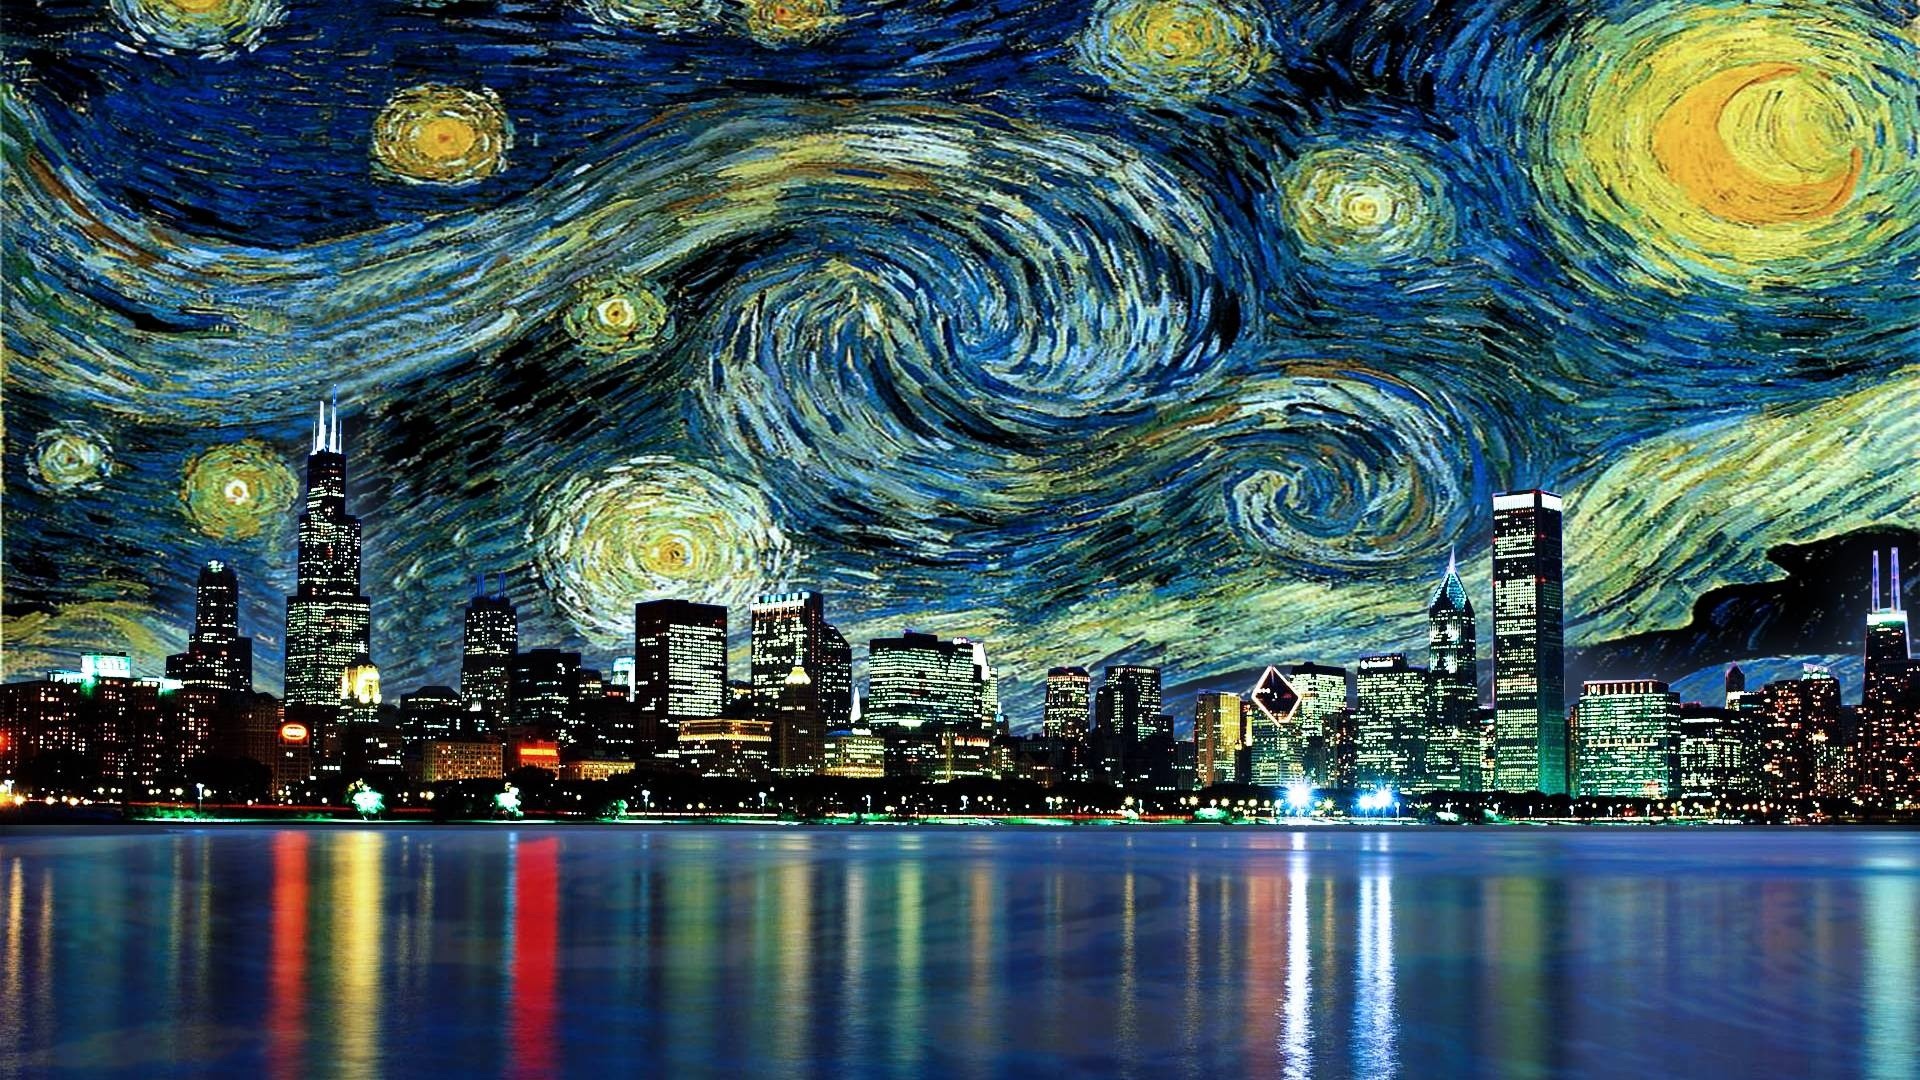 Cityscape Skyscraper Reflection Painting Vincent Van Gogh Movies Water Chicago The Starry Night Artw 1920x1080